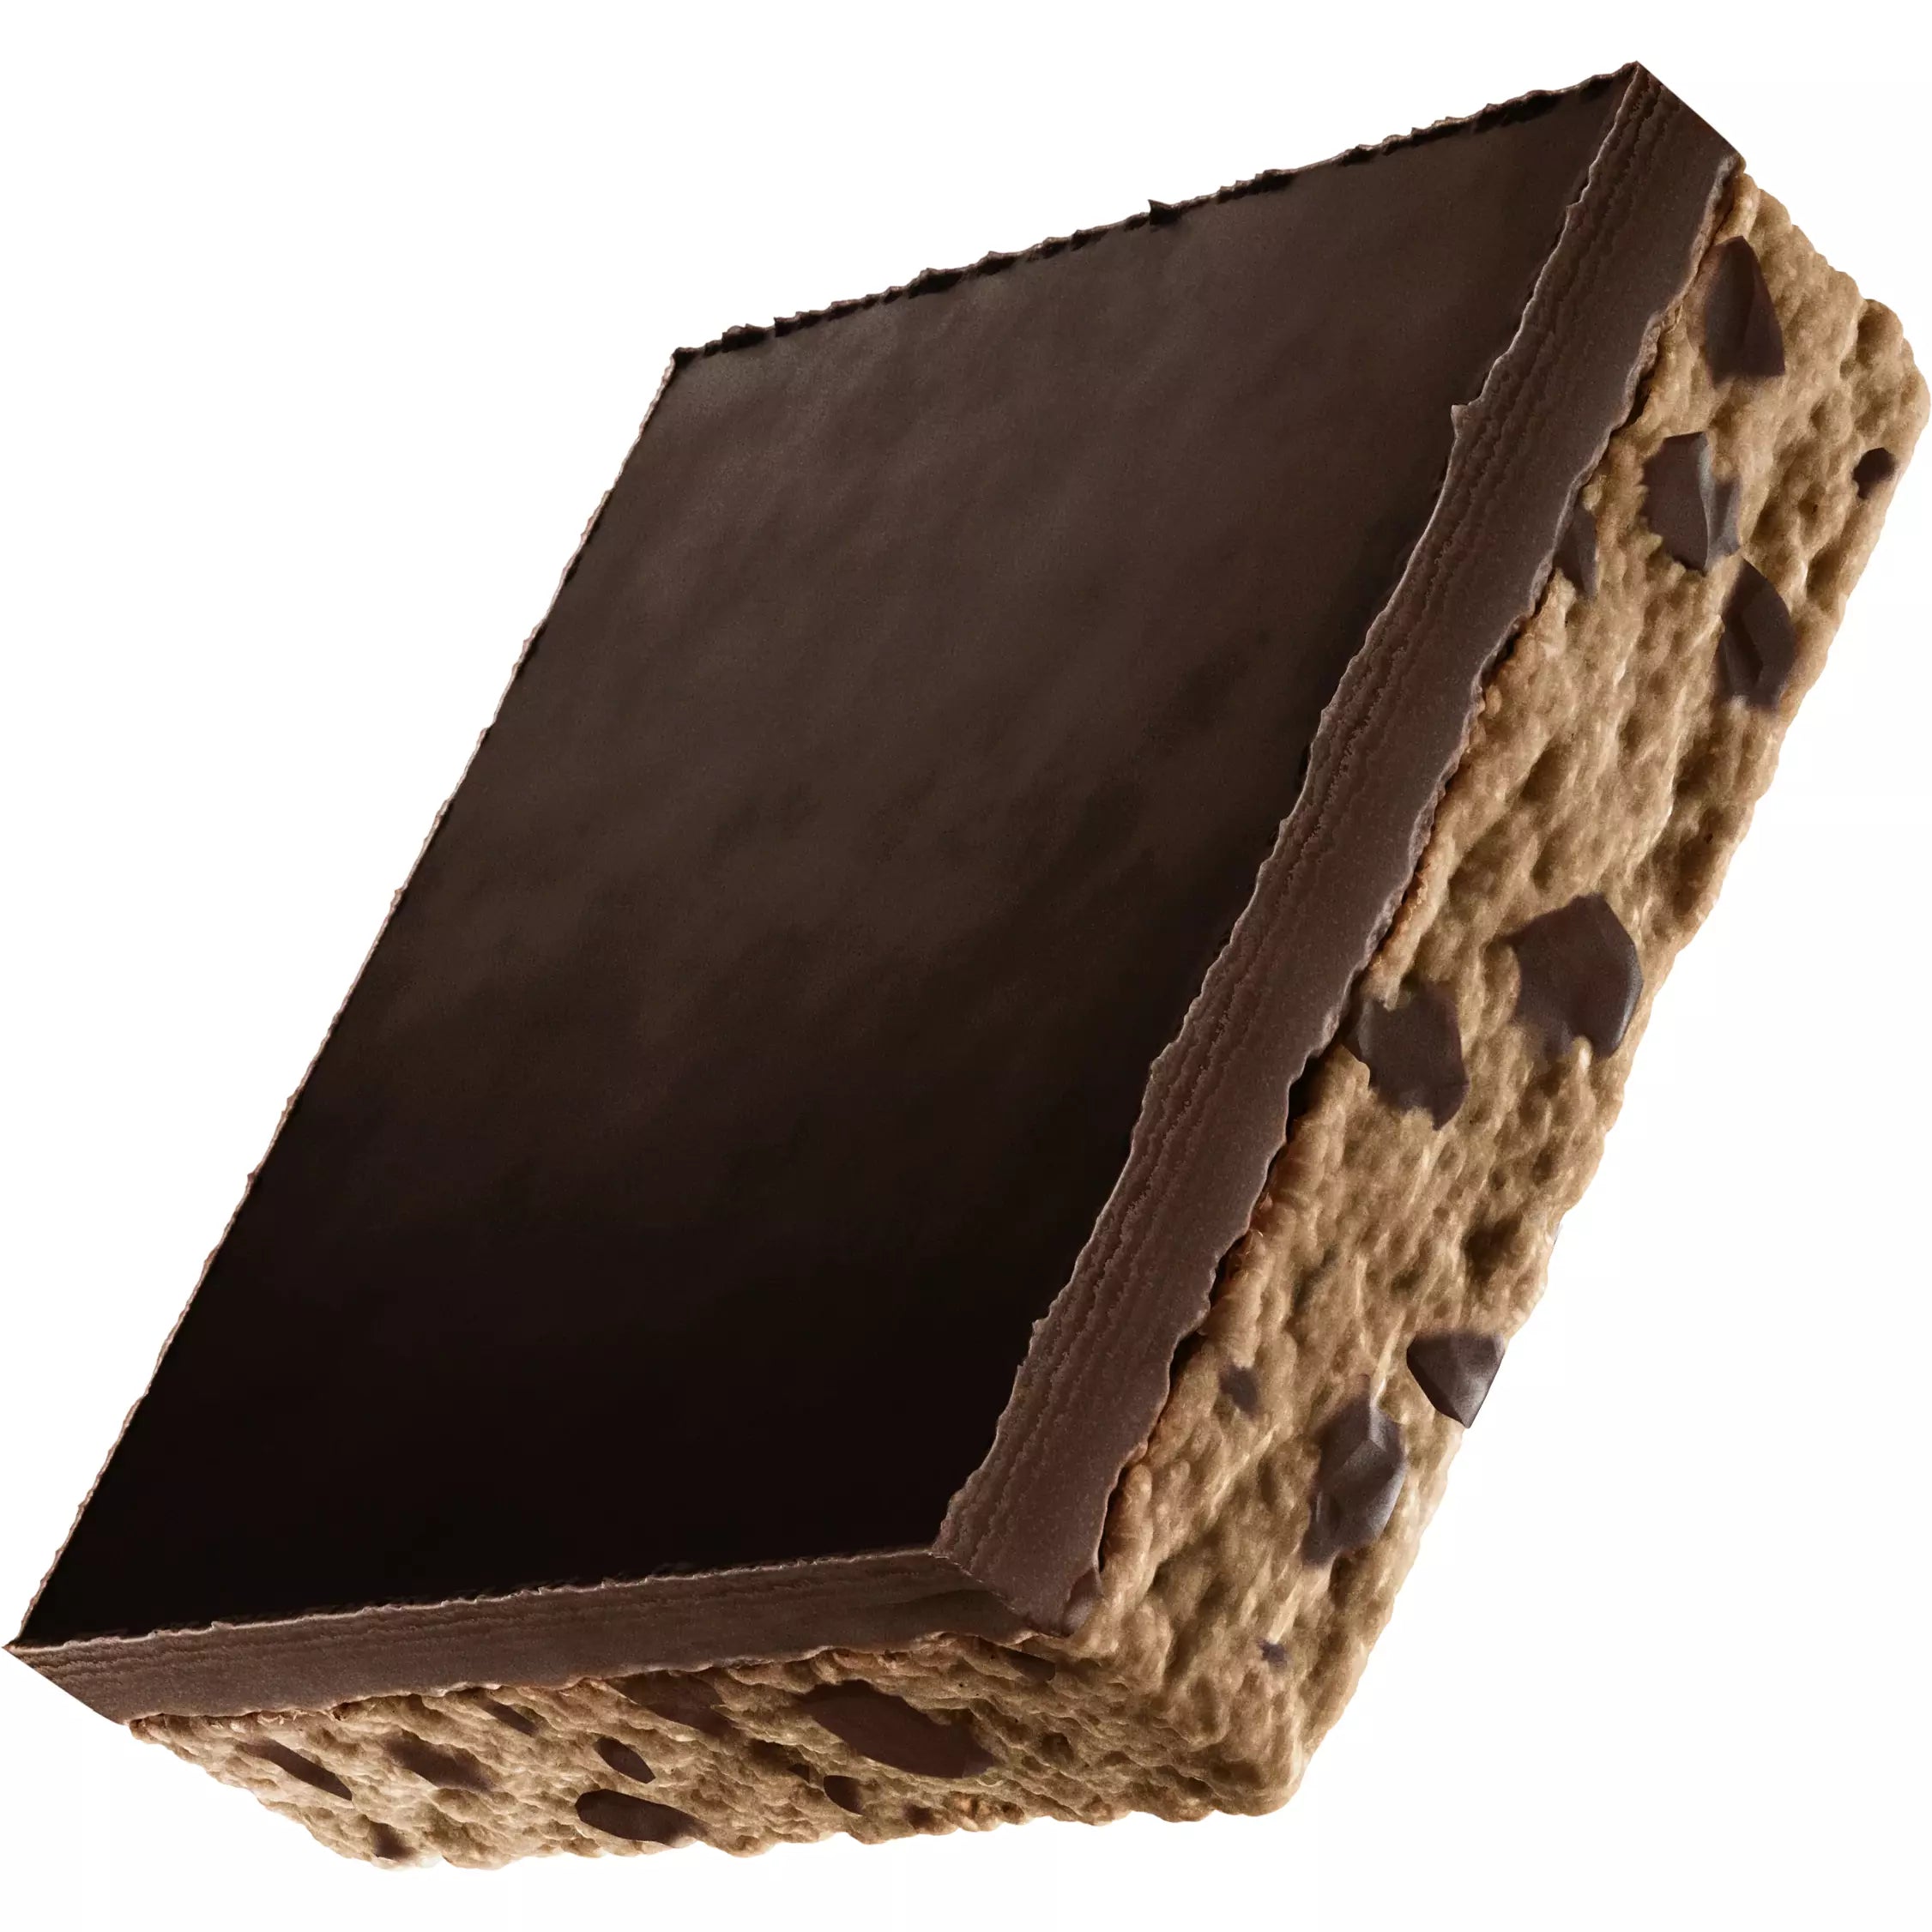 Mid-Day Squares NEW FORMAT (1 square) mid-day-squares-new-format-1-square Protein Snacks Almond Crunch,Brownie Batter,Peanut Butta,Cookie Dough Mid-Day Squares